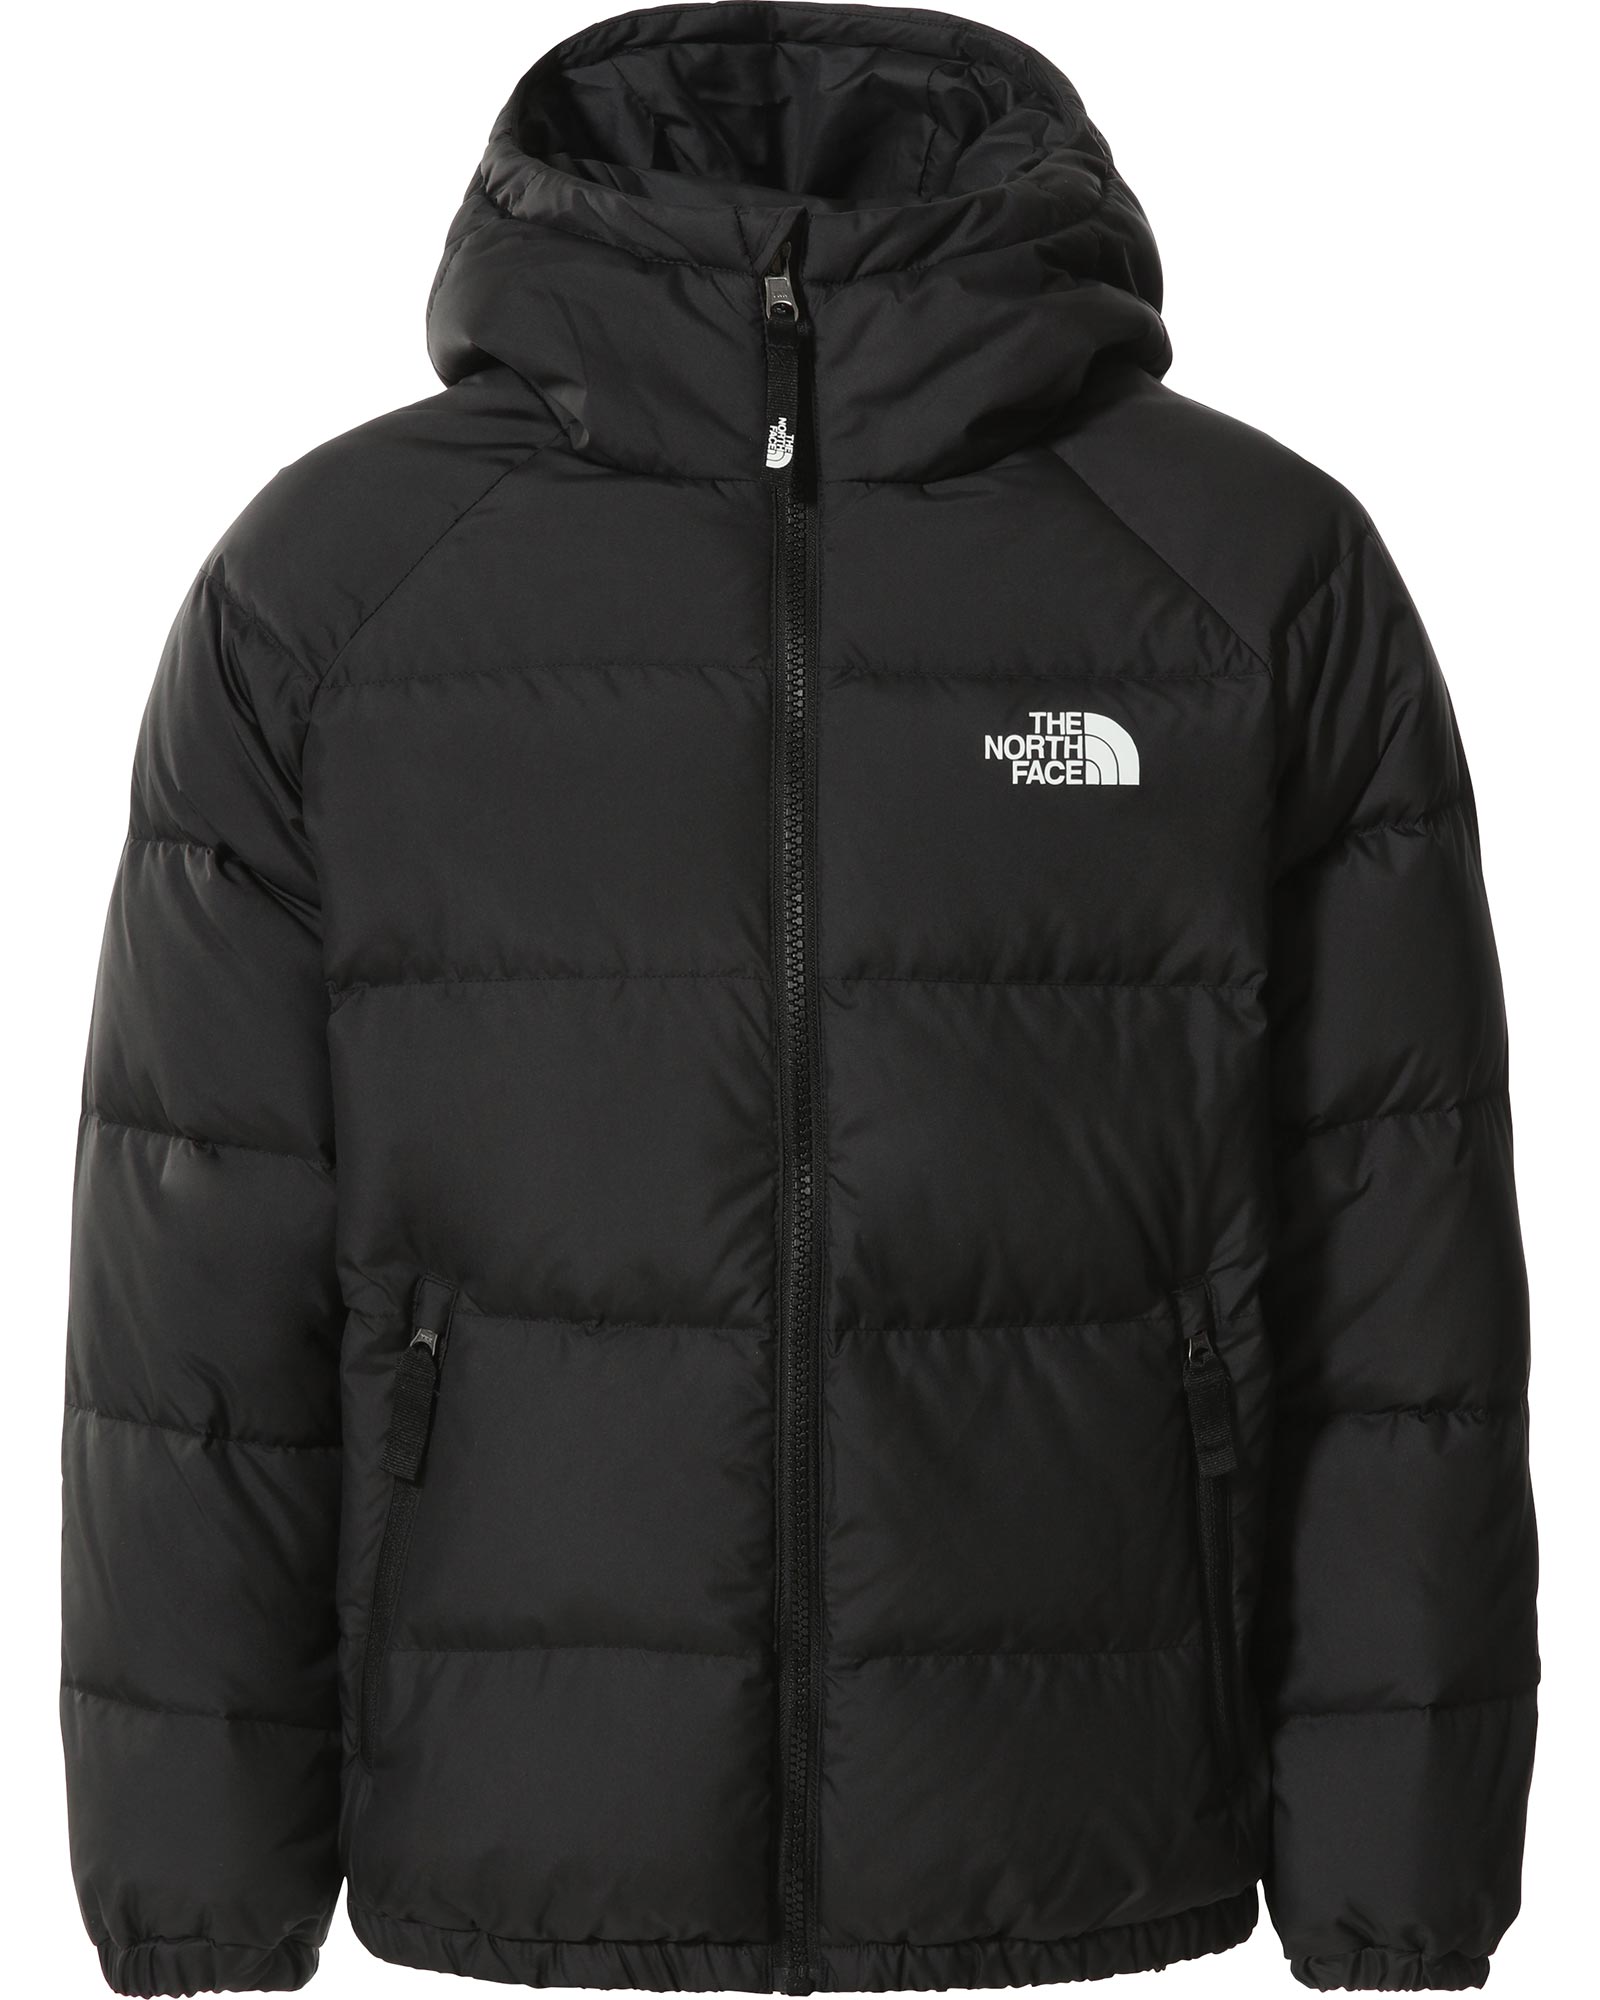 The North Face Hyalite Boys Down Jacket